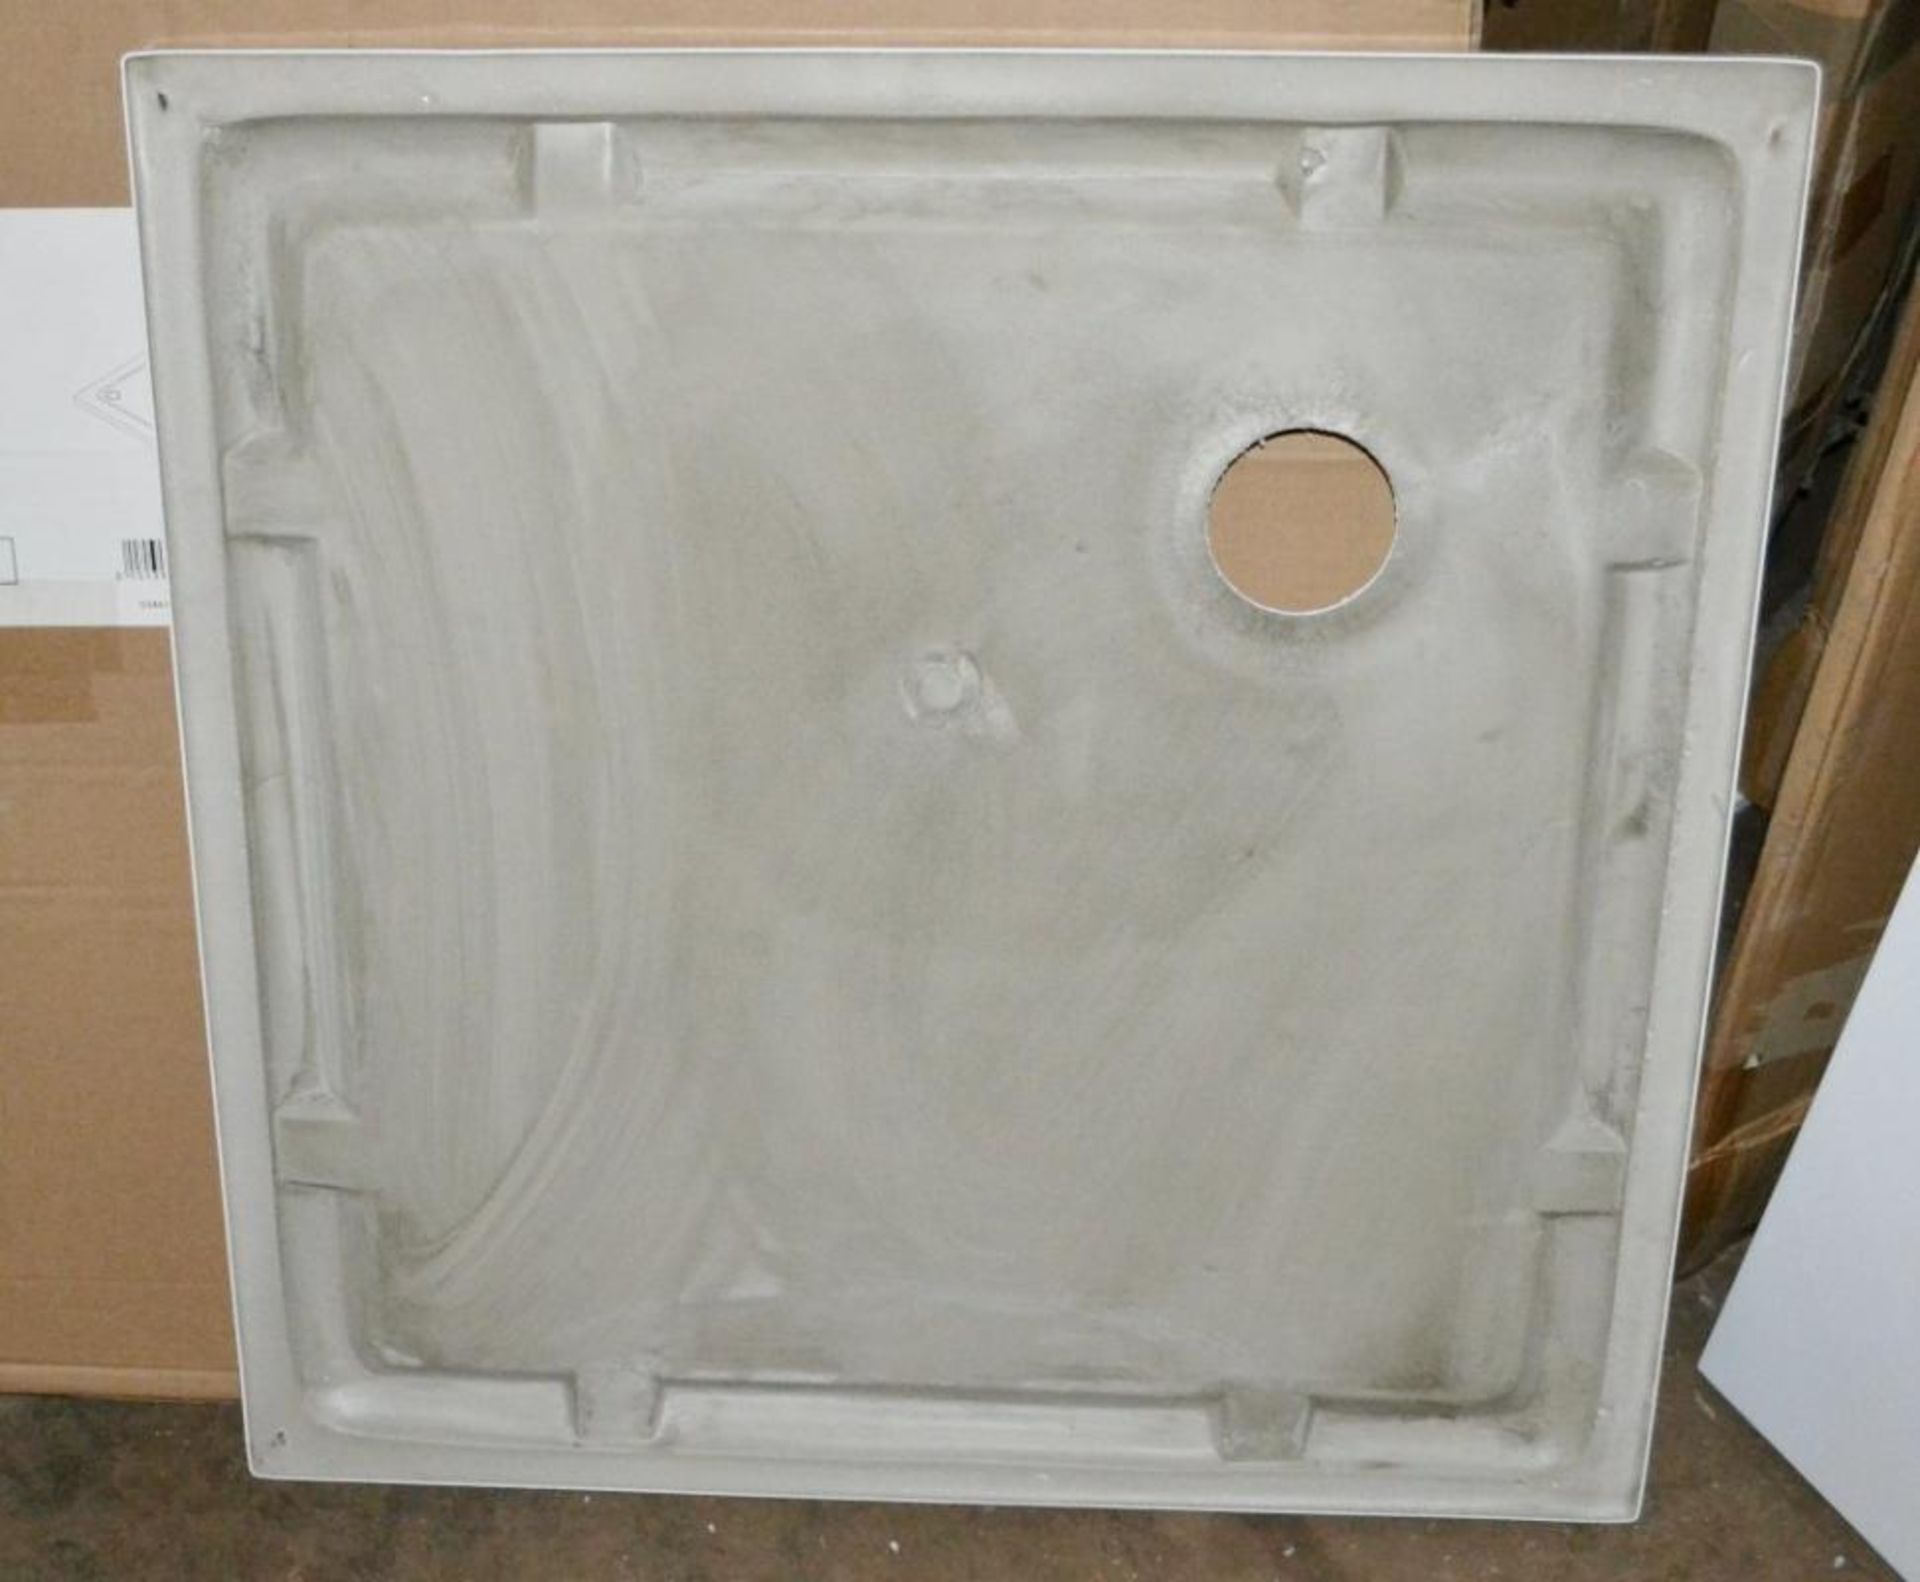 1 x 760mm Square Shower Tray - New / Unused Stock (PS76) - Ref: MT335 - CL269 - Location: Bolton BL1 - Image 4 of 4